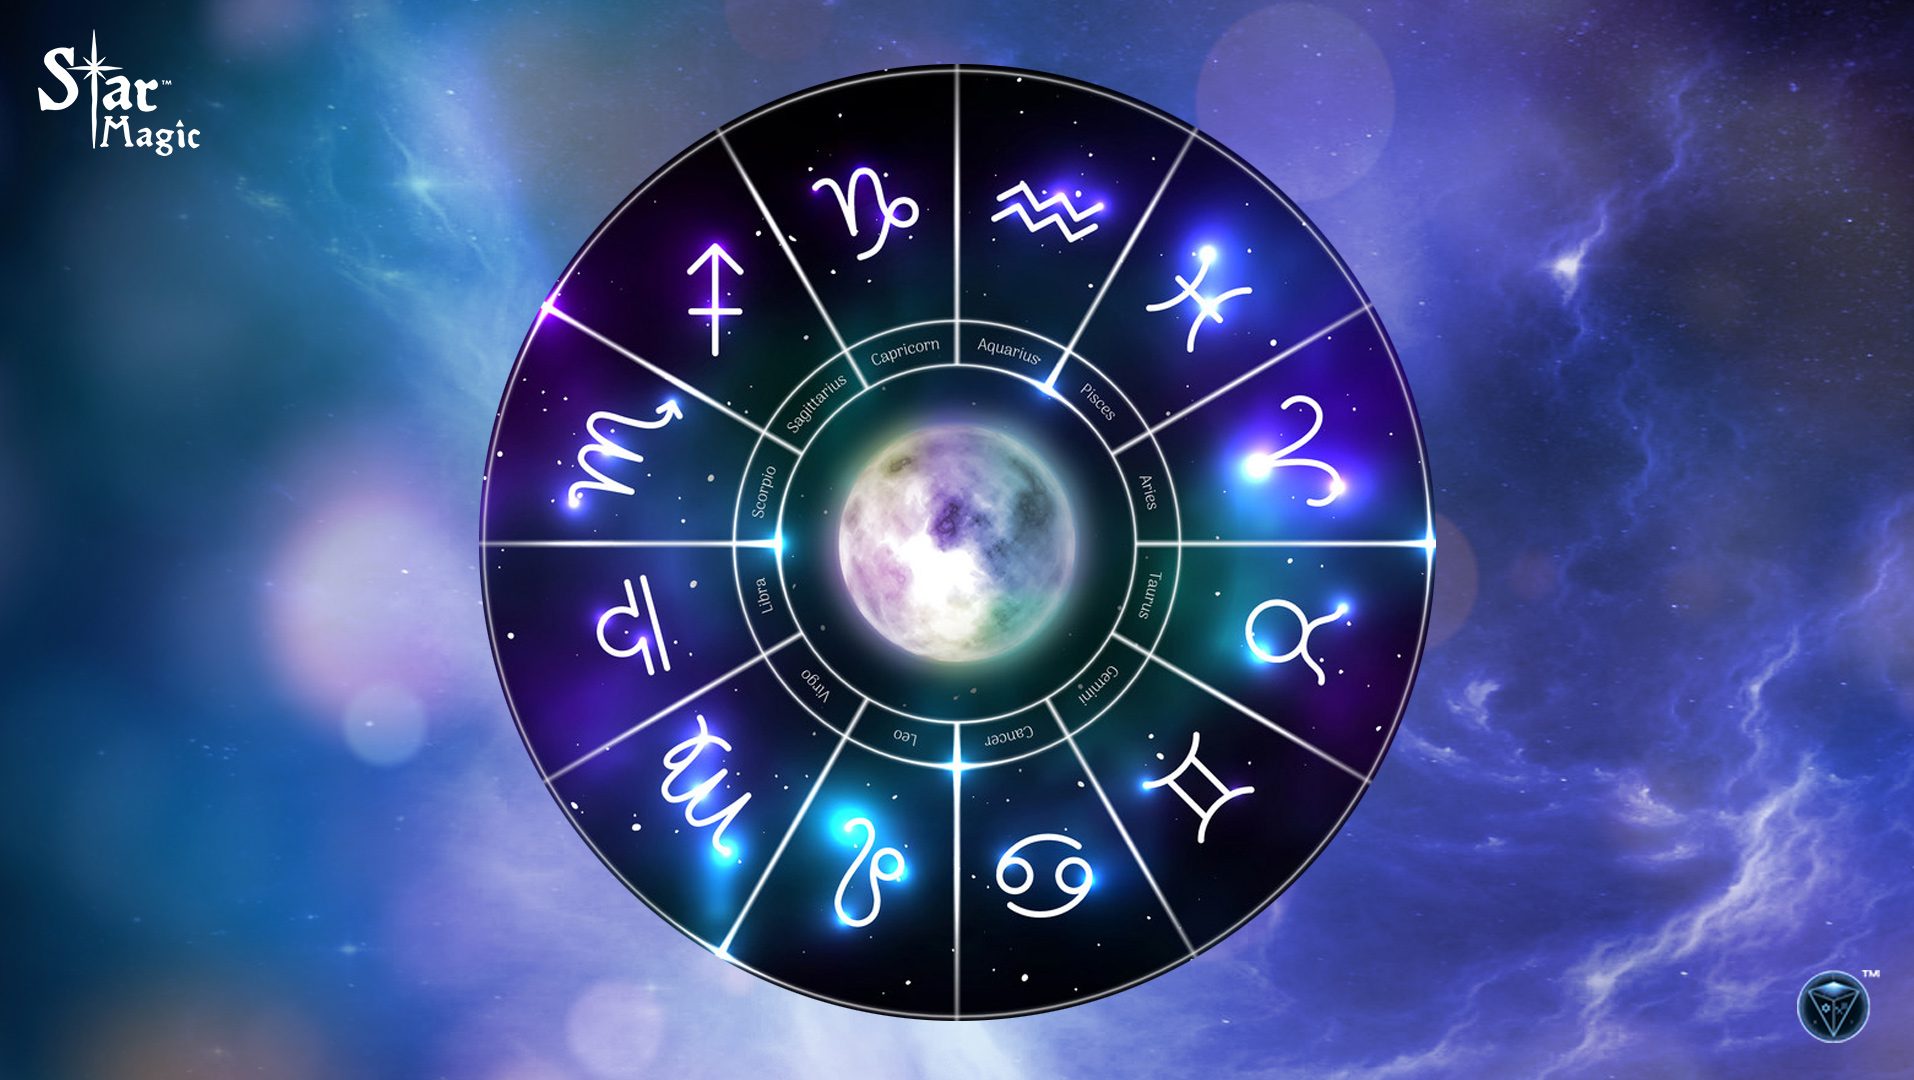 The Power of Astrology